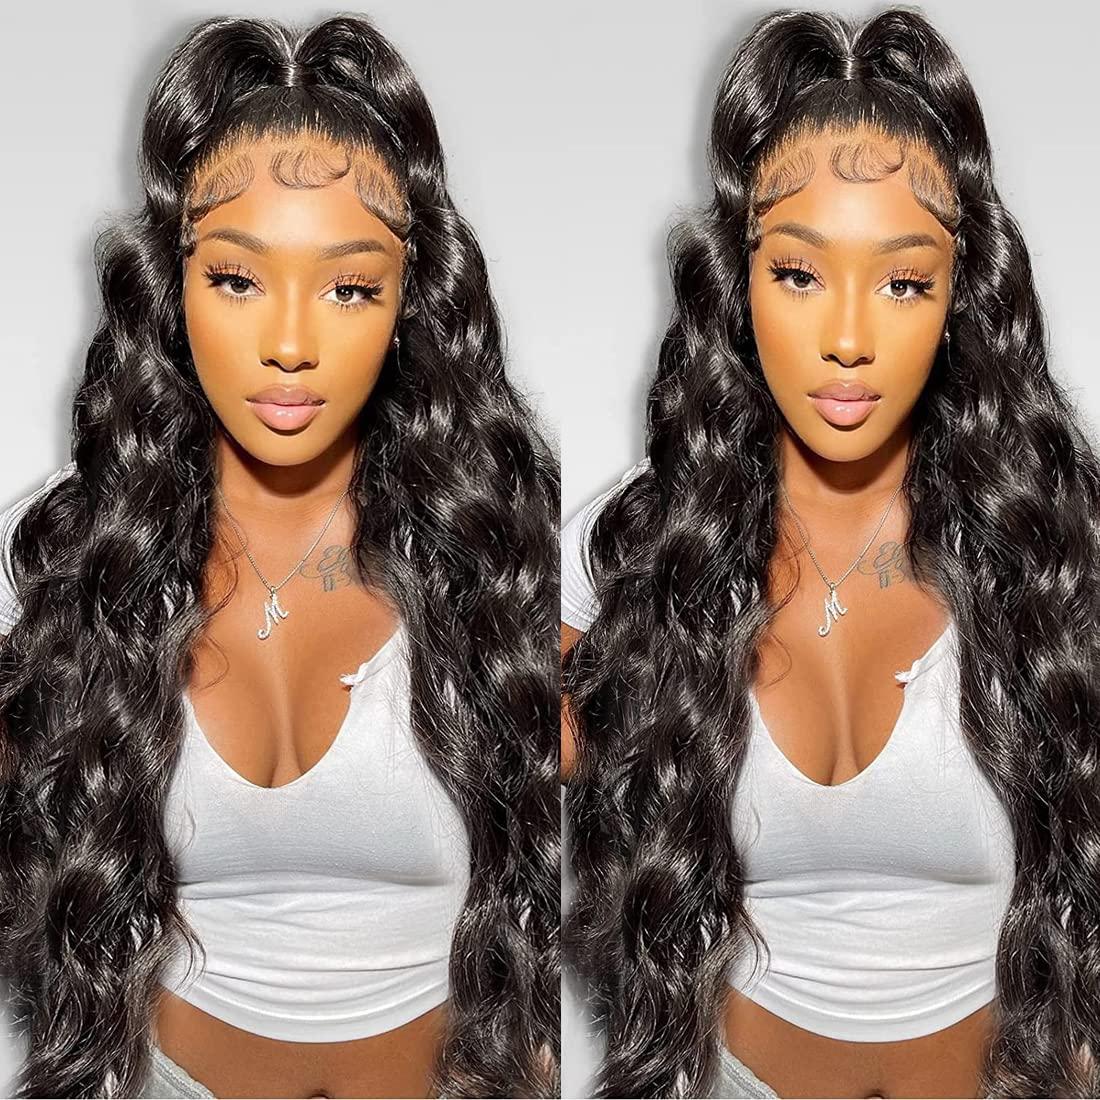 Kbeth Body Wave Human Hair Extensions Clip Ins for Black Woman